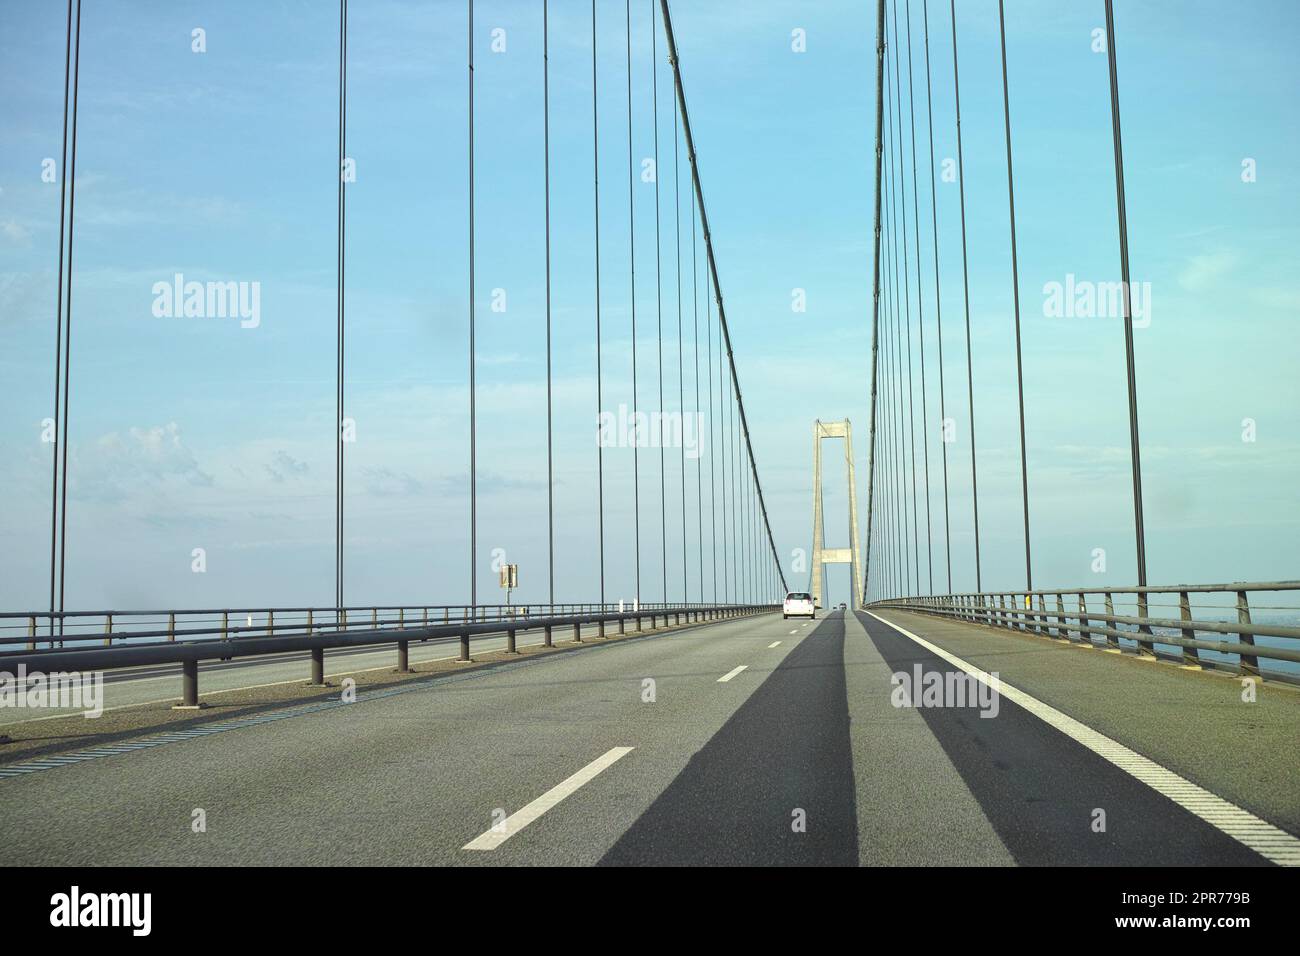 Storebaelt suspension bridge in Denmark against blue sky background. Overpass road crossing for transport to link travel destination routes. Infrastructure and architecture design of famous landmark Stock Photo